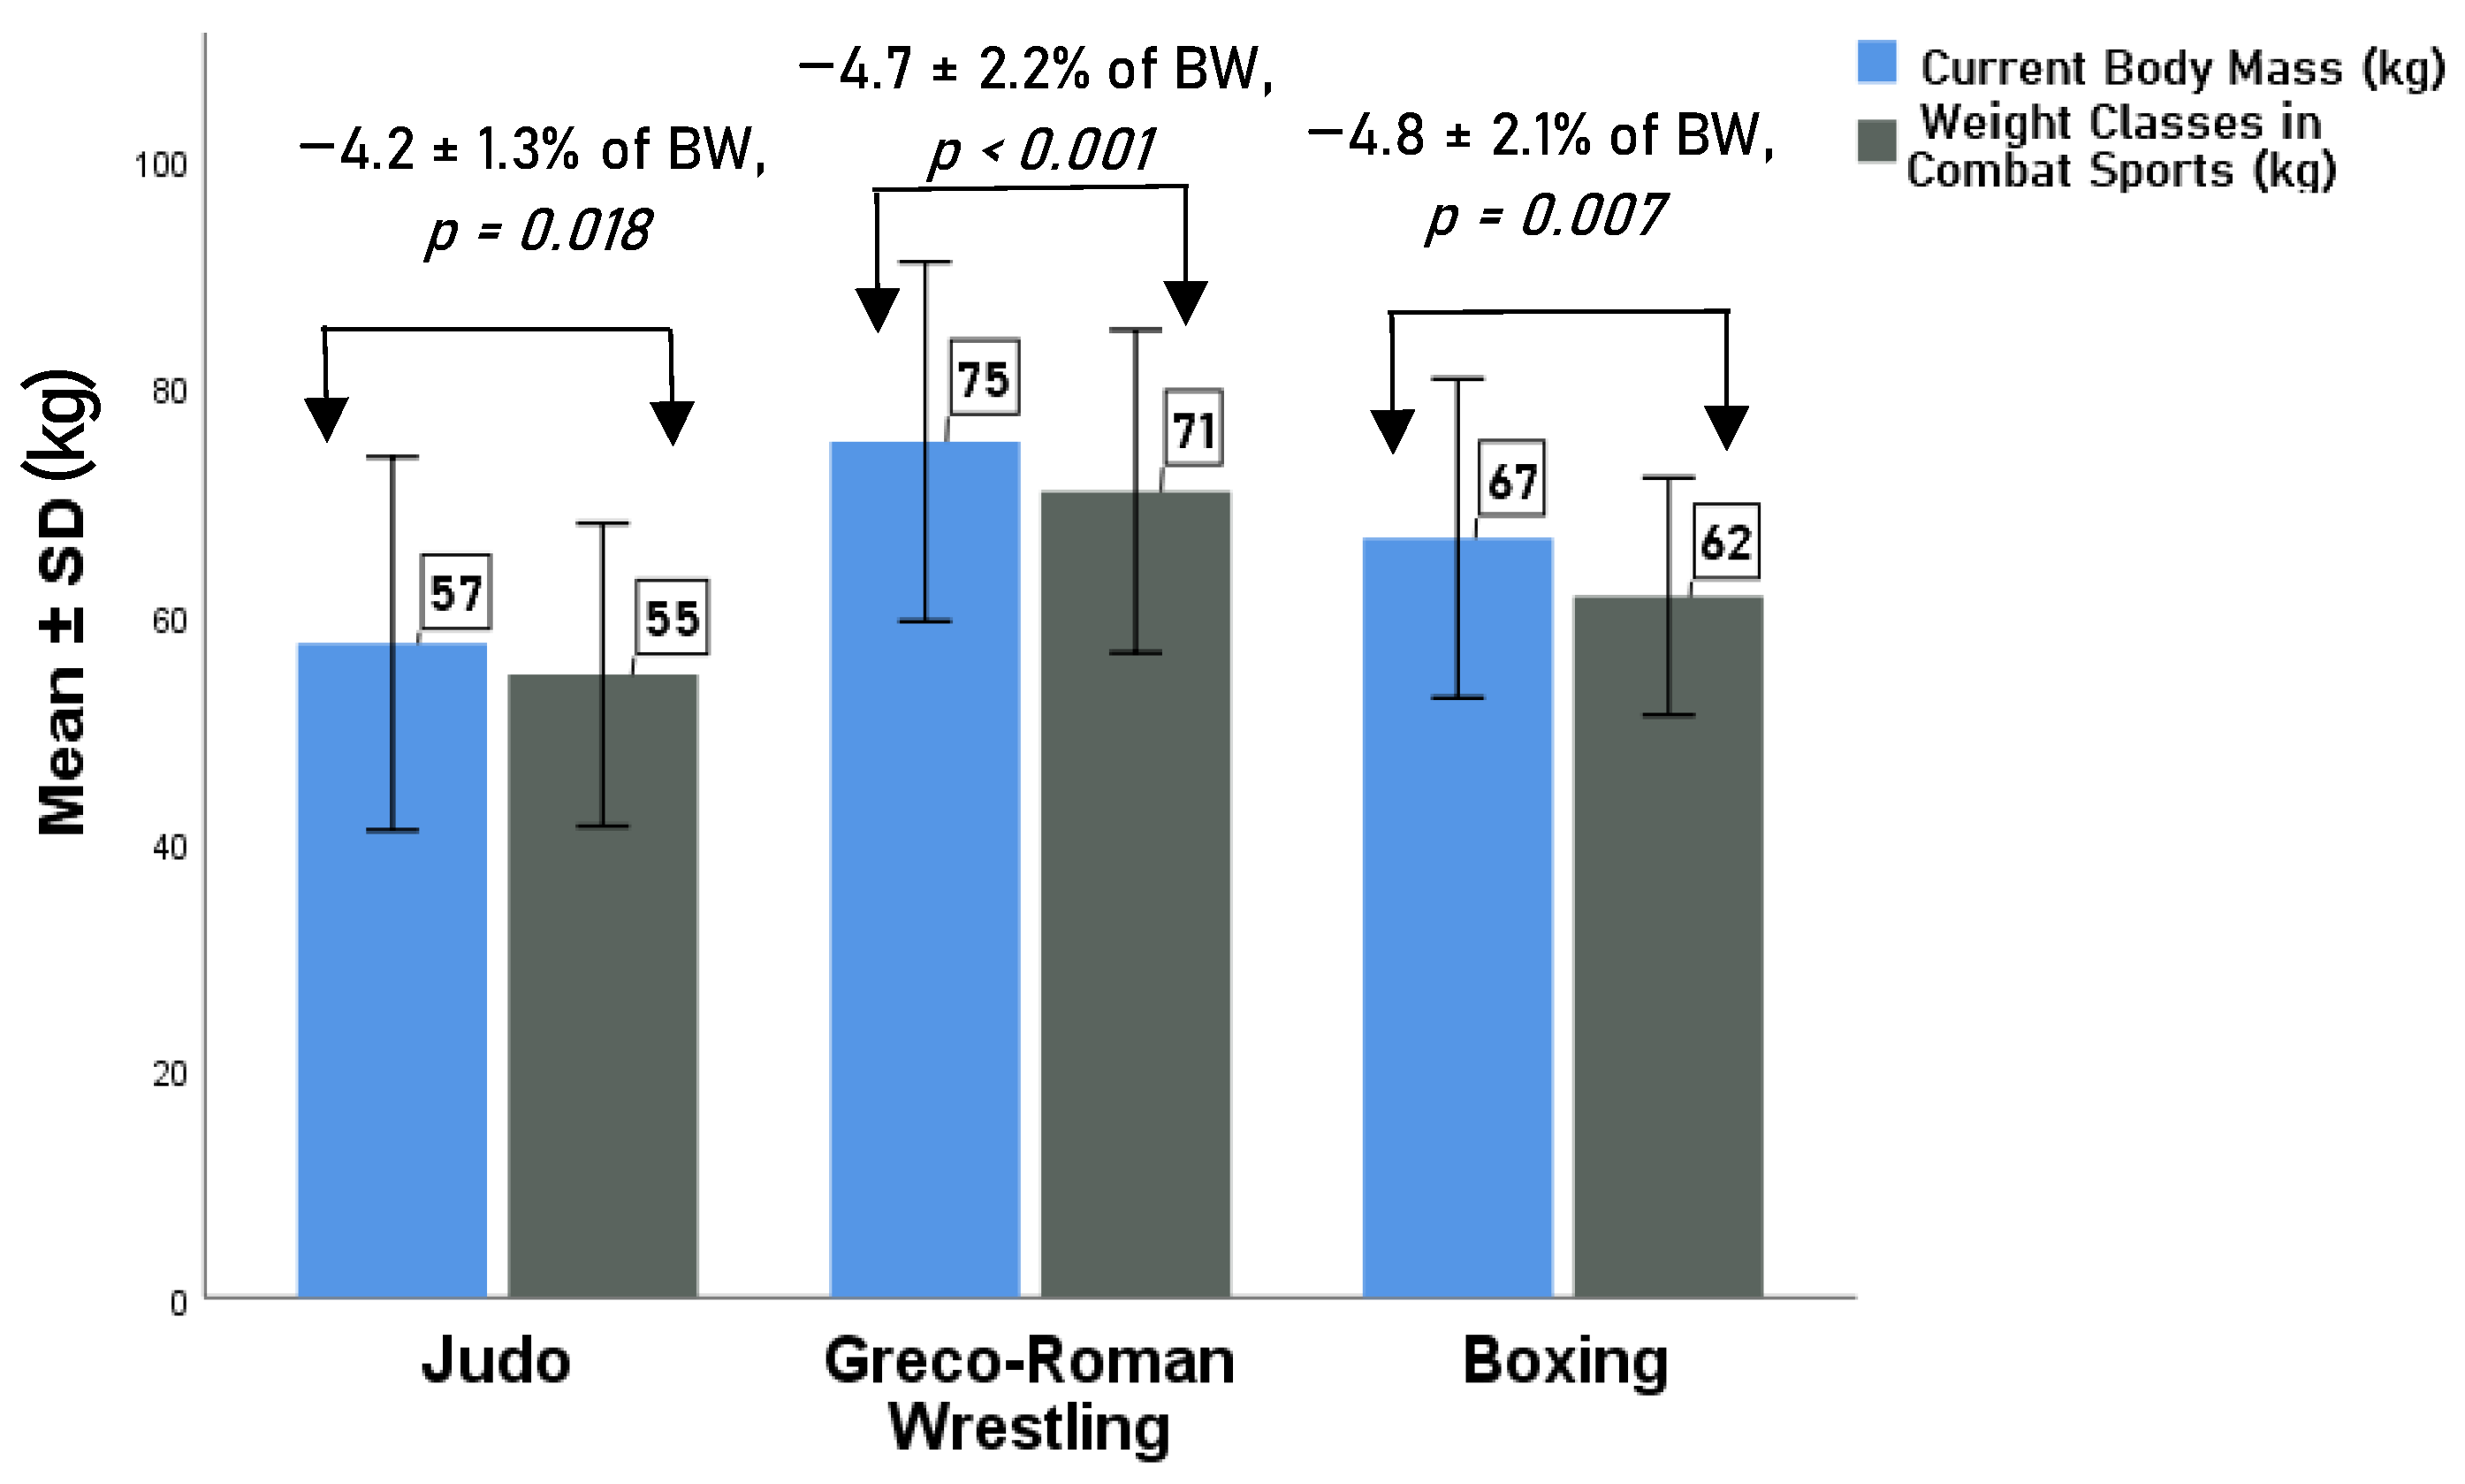 Healthcare Free Full-Text The Association between Rapid Weight Loss and Body Composition in Elite Combat Sports Athletes